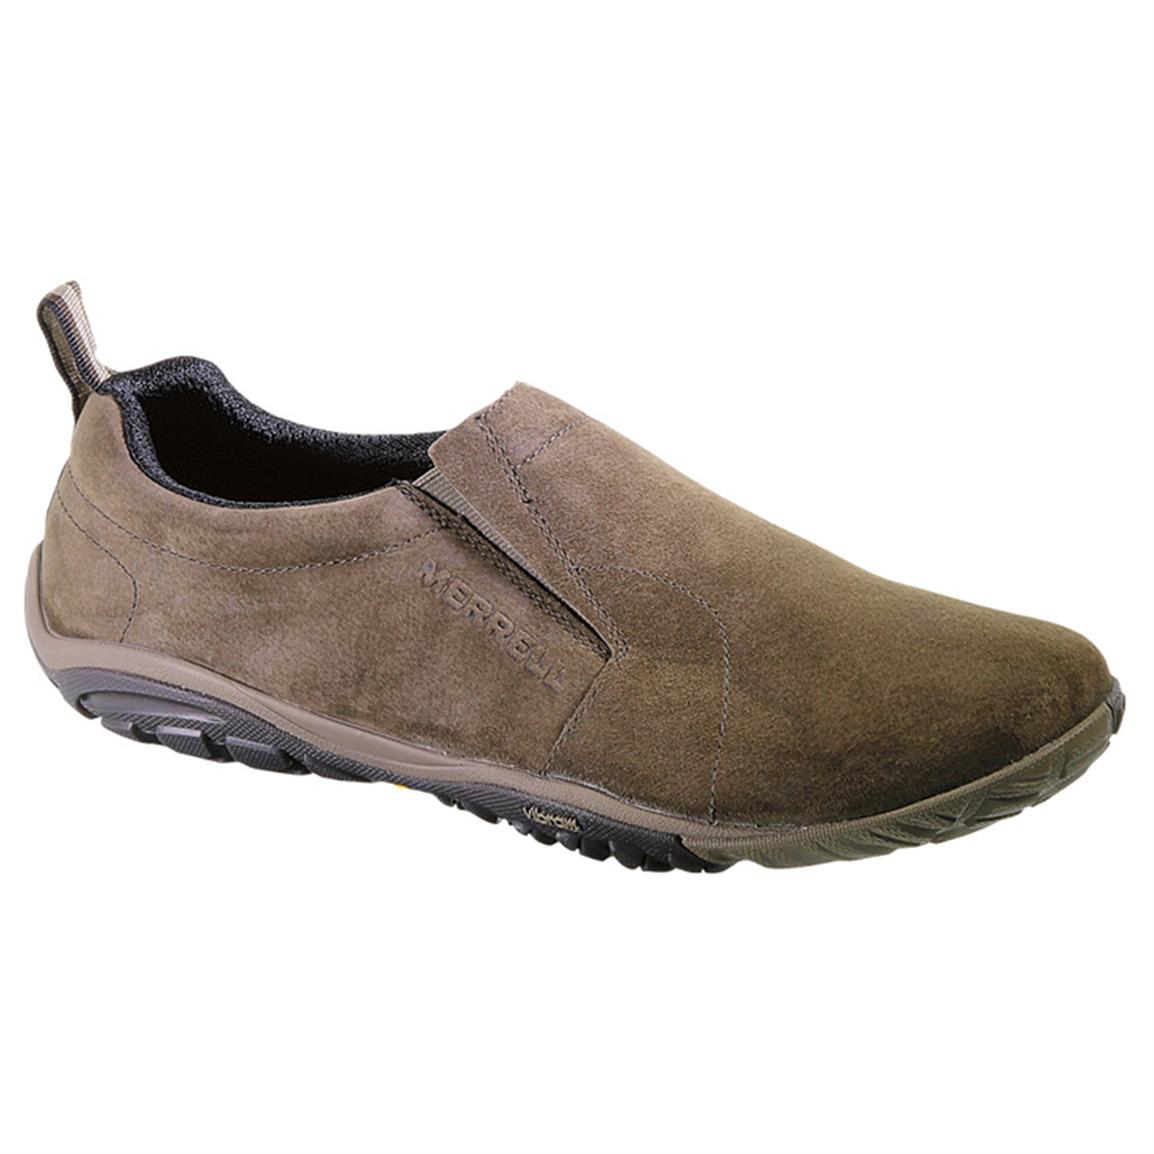 Men's Merrell Jungle Glove Shoes - 584033, Casual Shoes at Sportsman's ...